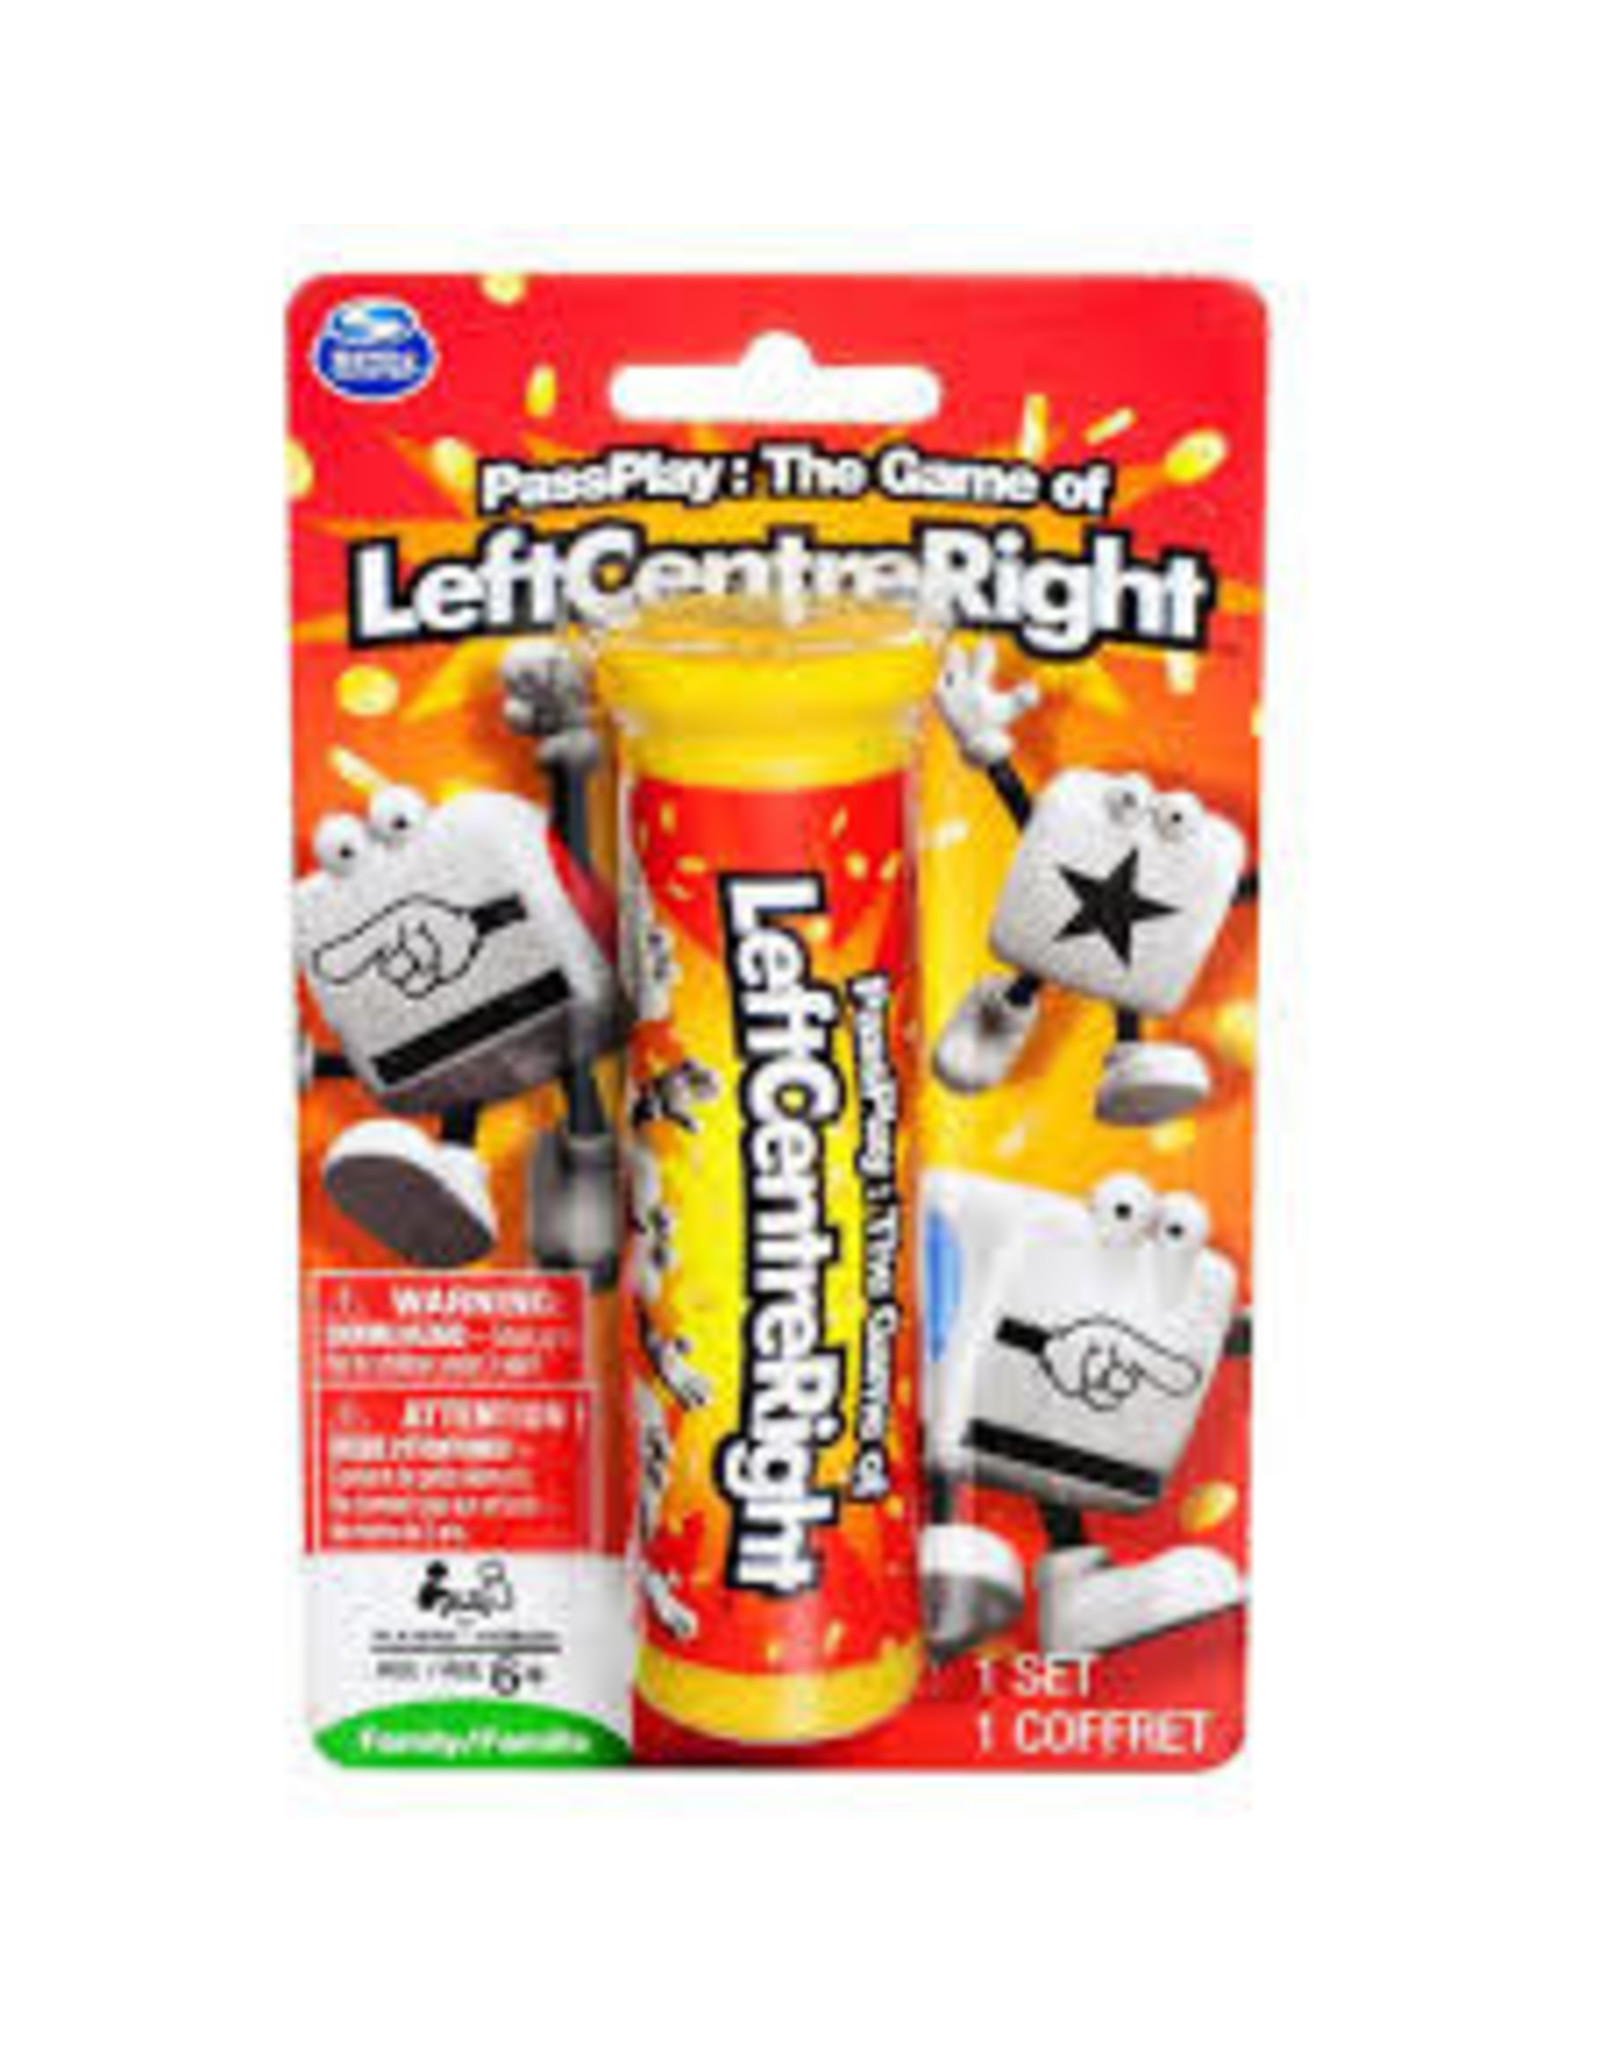 toysmith LCR Left Center Right Dice Game